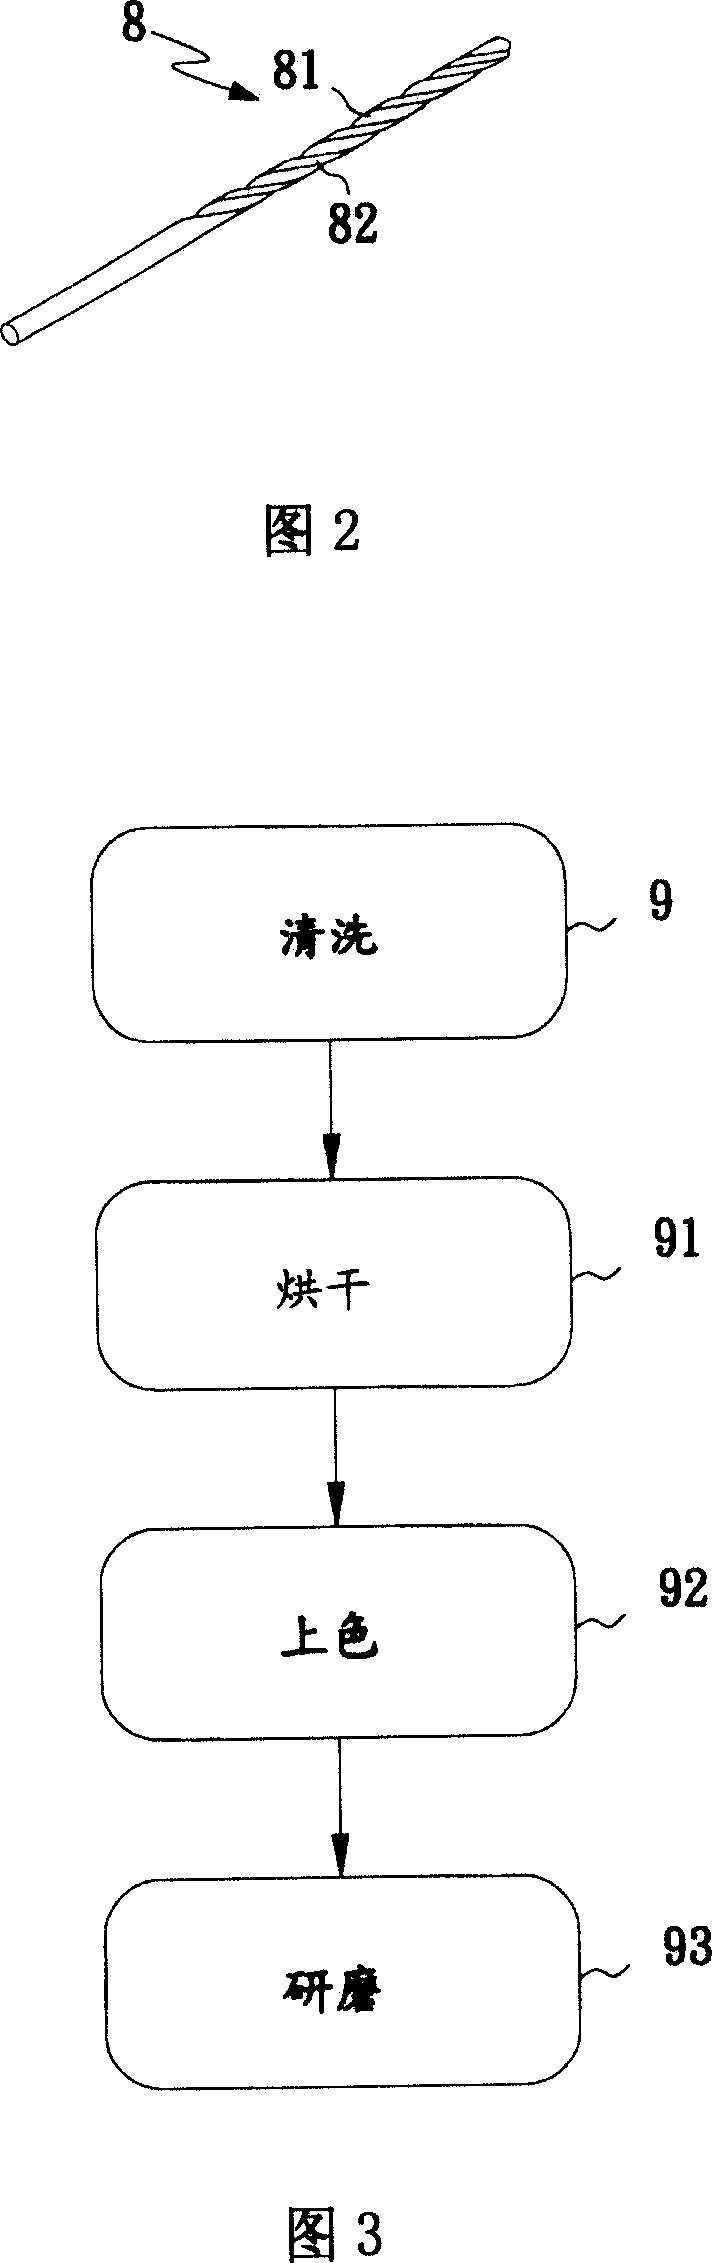 Method for cleaning rubber slag and detritus for circuit board cutting tool